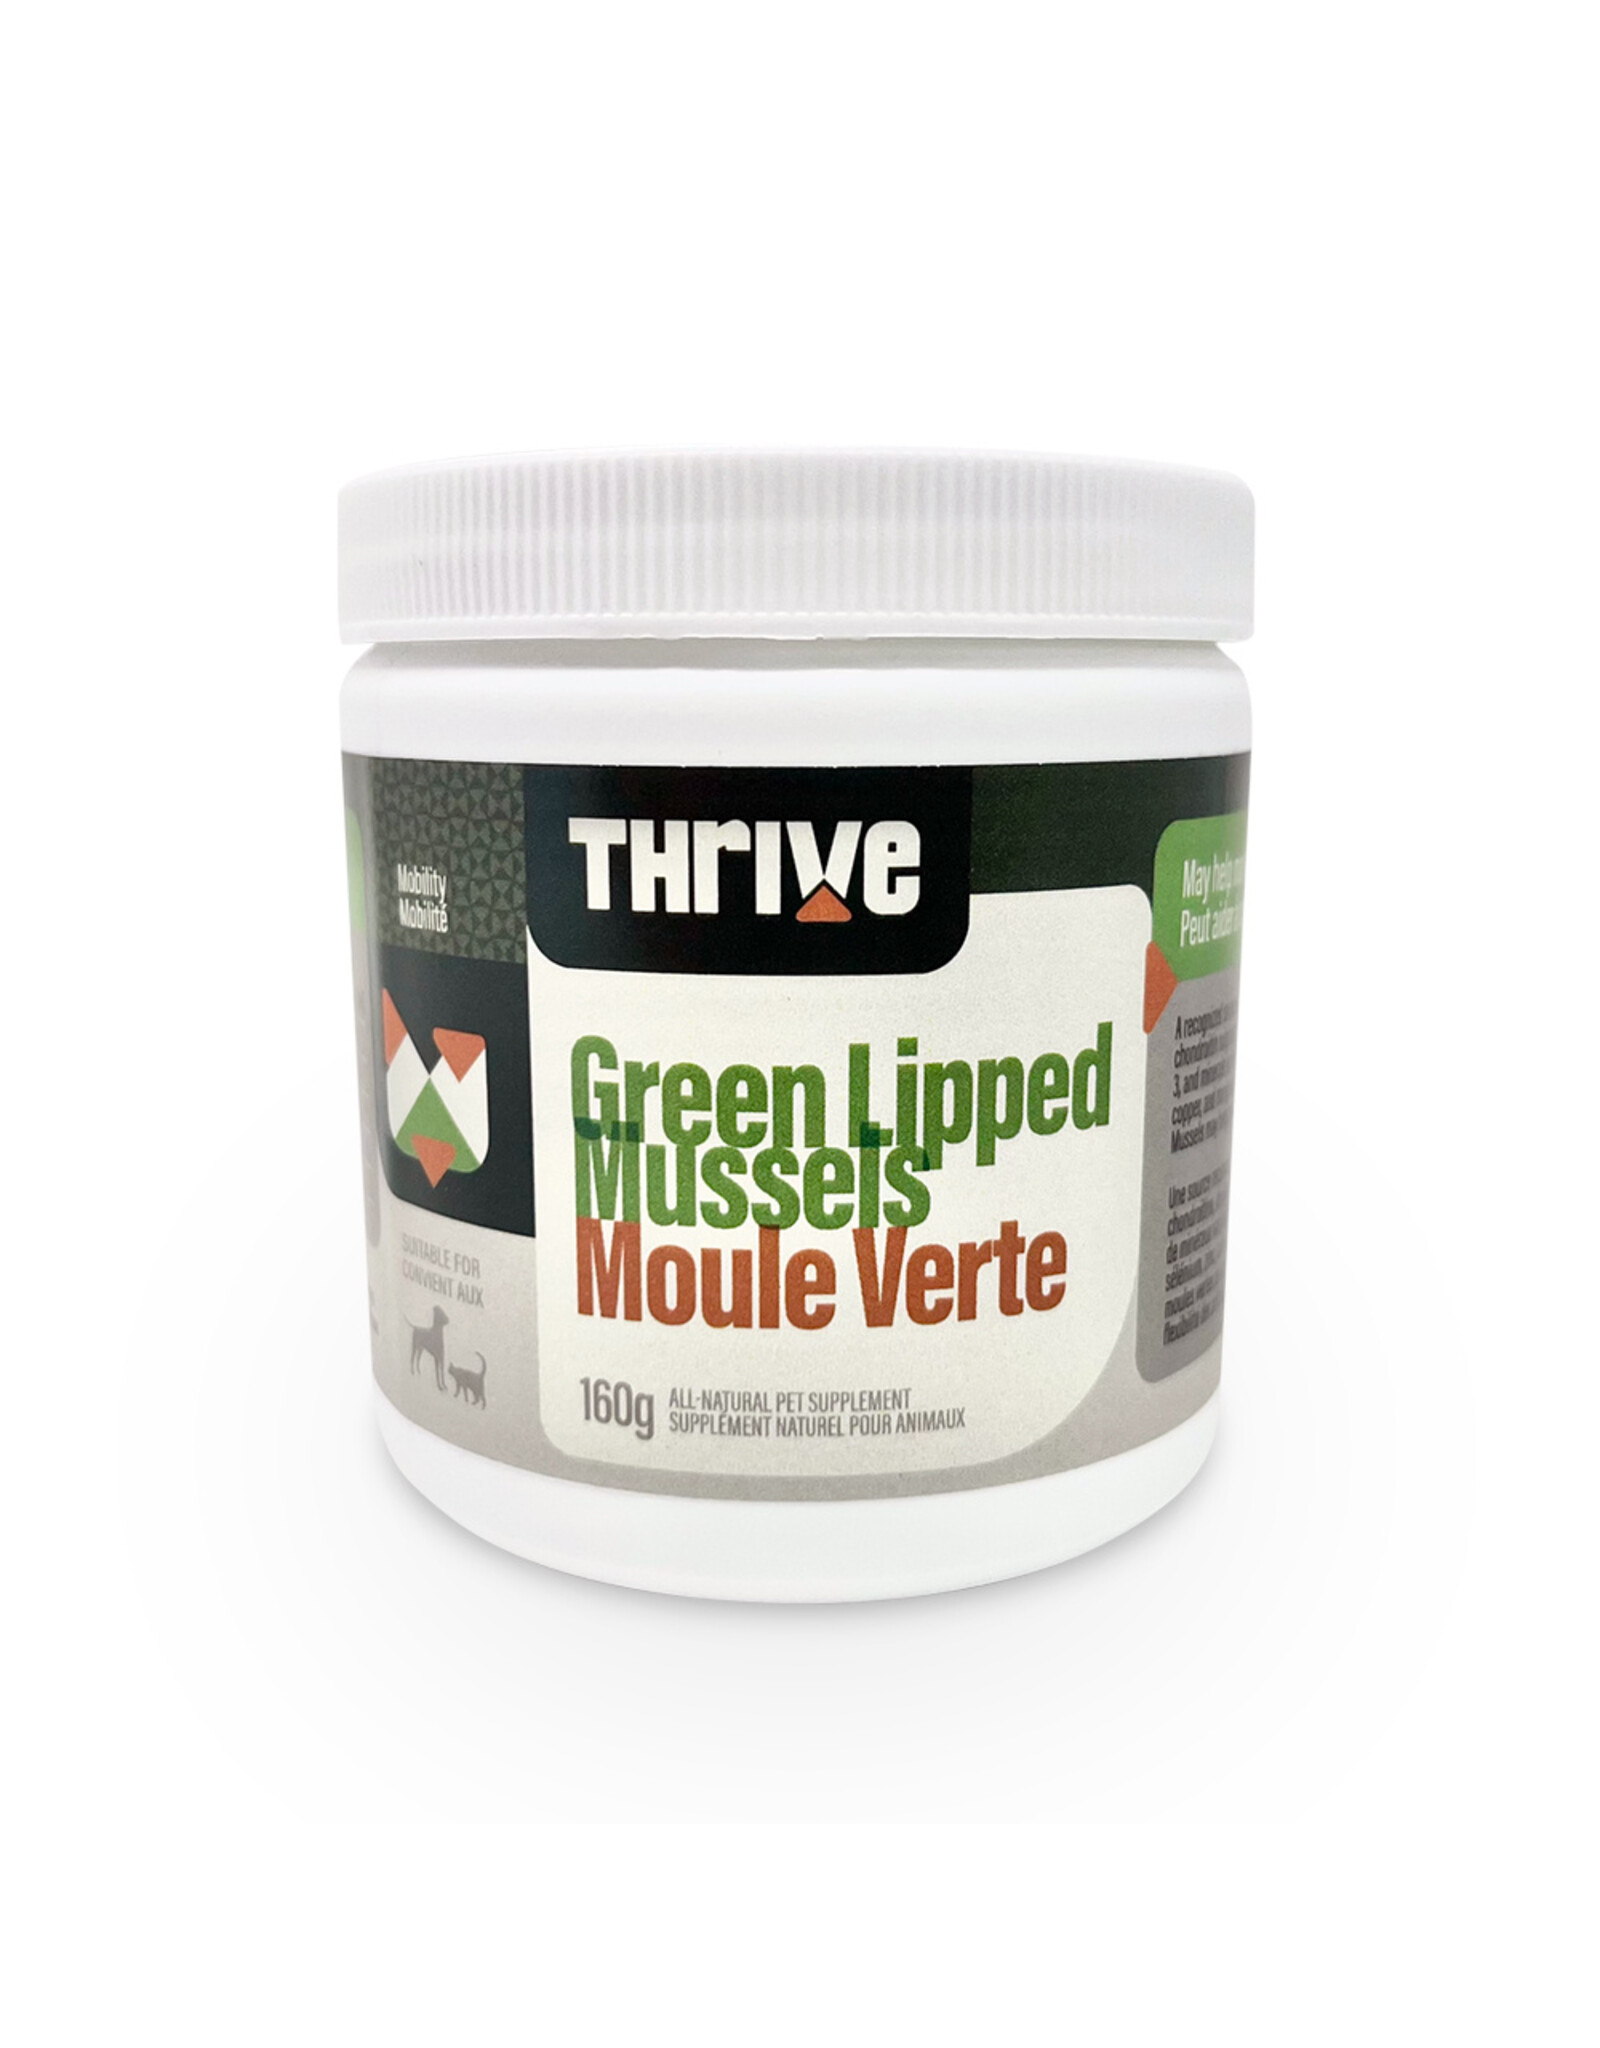 Thrive Green Lipped Mussels 160g